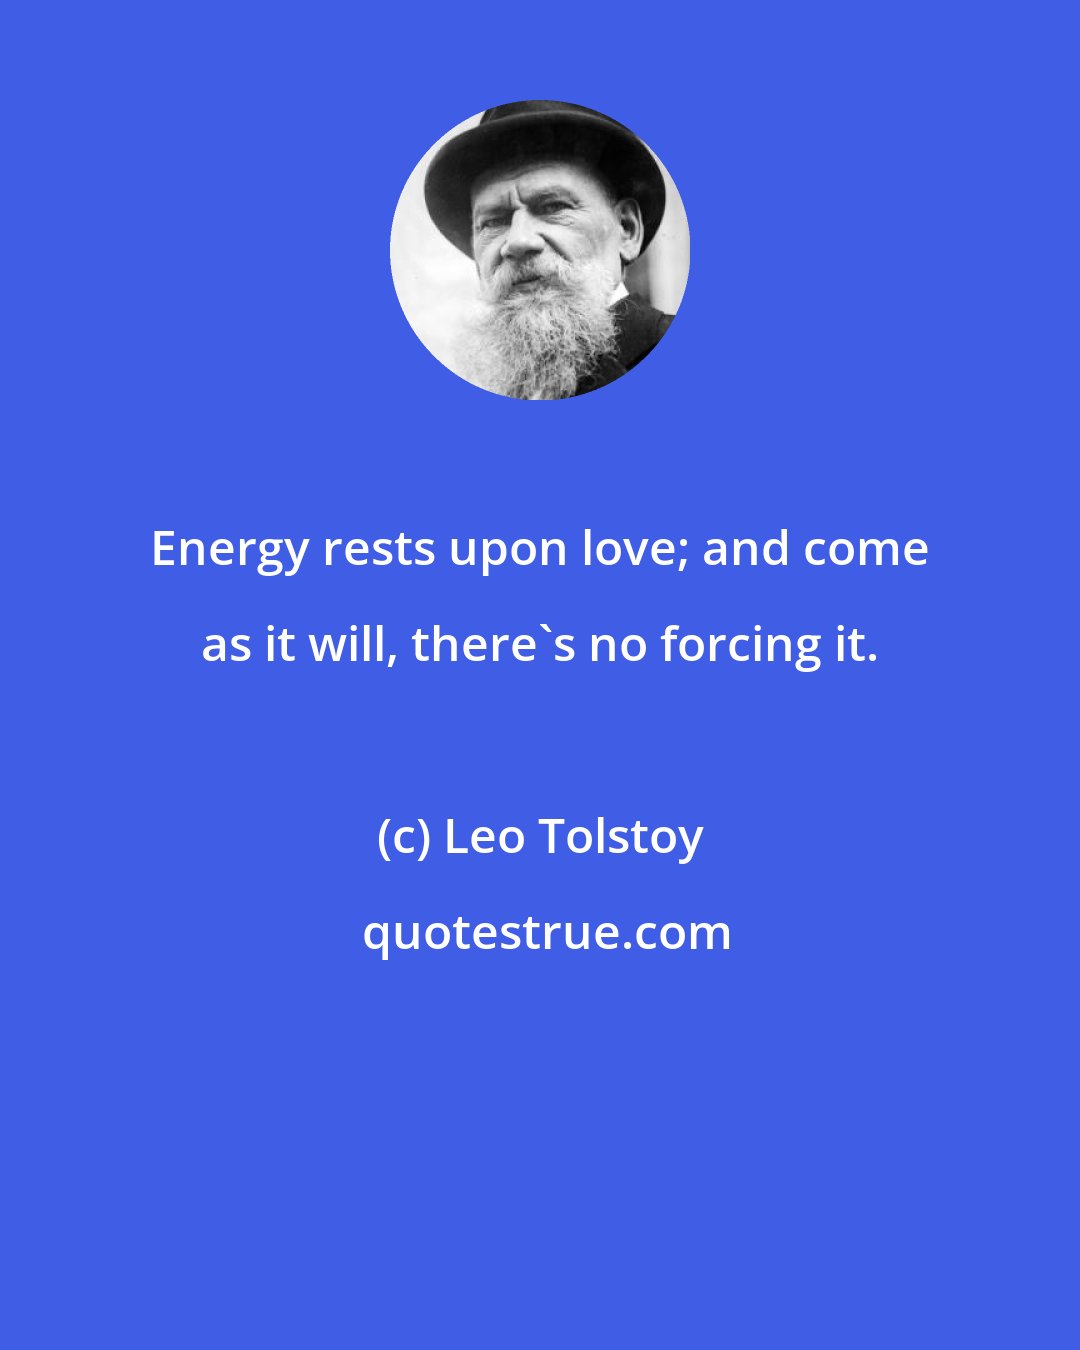 Leo Tolstoy: Energy rests upon love; and come as it will, there's no forcing it.